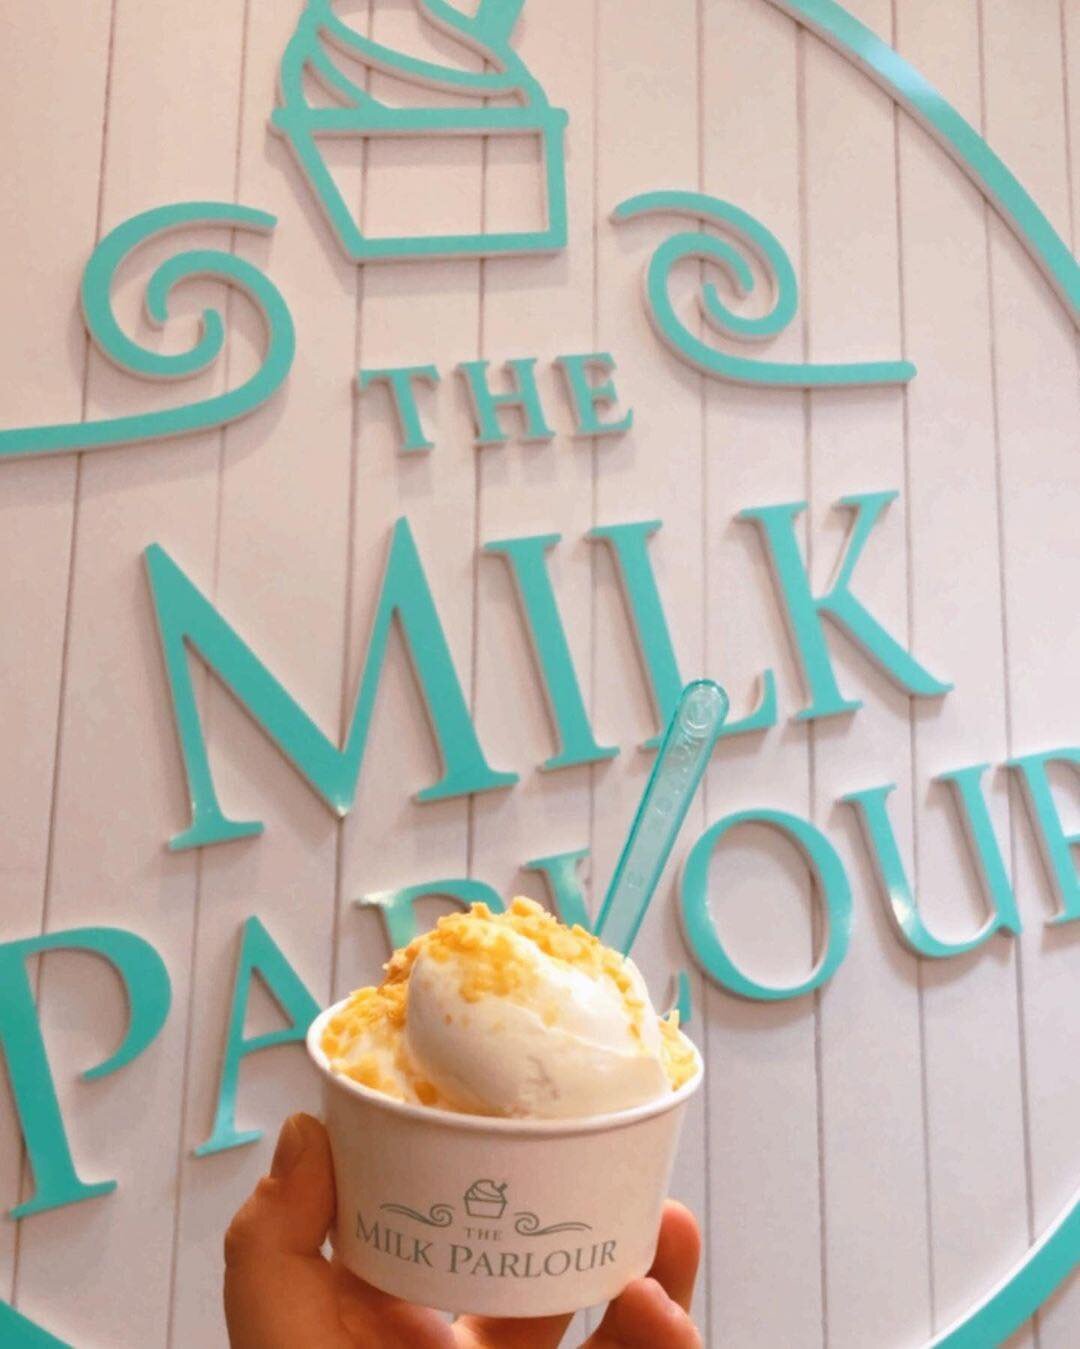 Our classic honeycomb never fails! 

We&rsquo;re scooping until 5.30 today 

🍦🍦🍦🍦🍦

#followtheherd